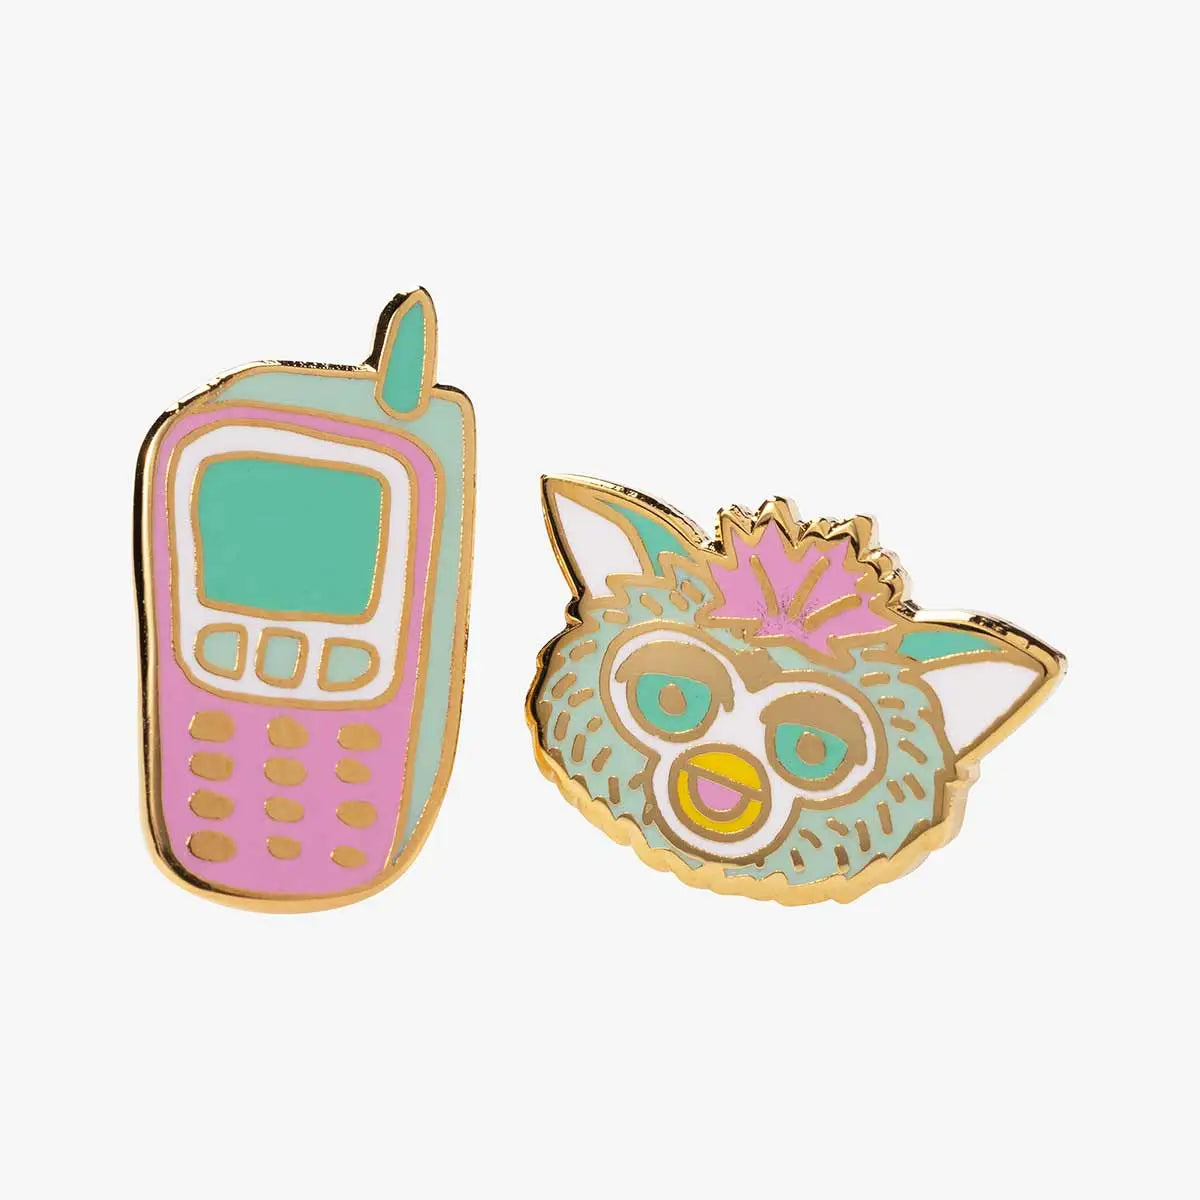 Furby and 90s Phone Earrings